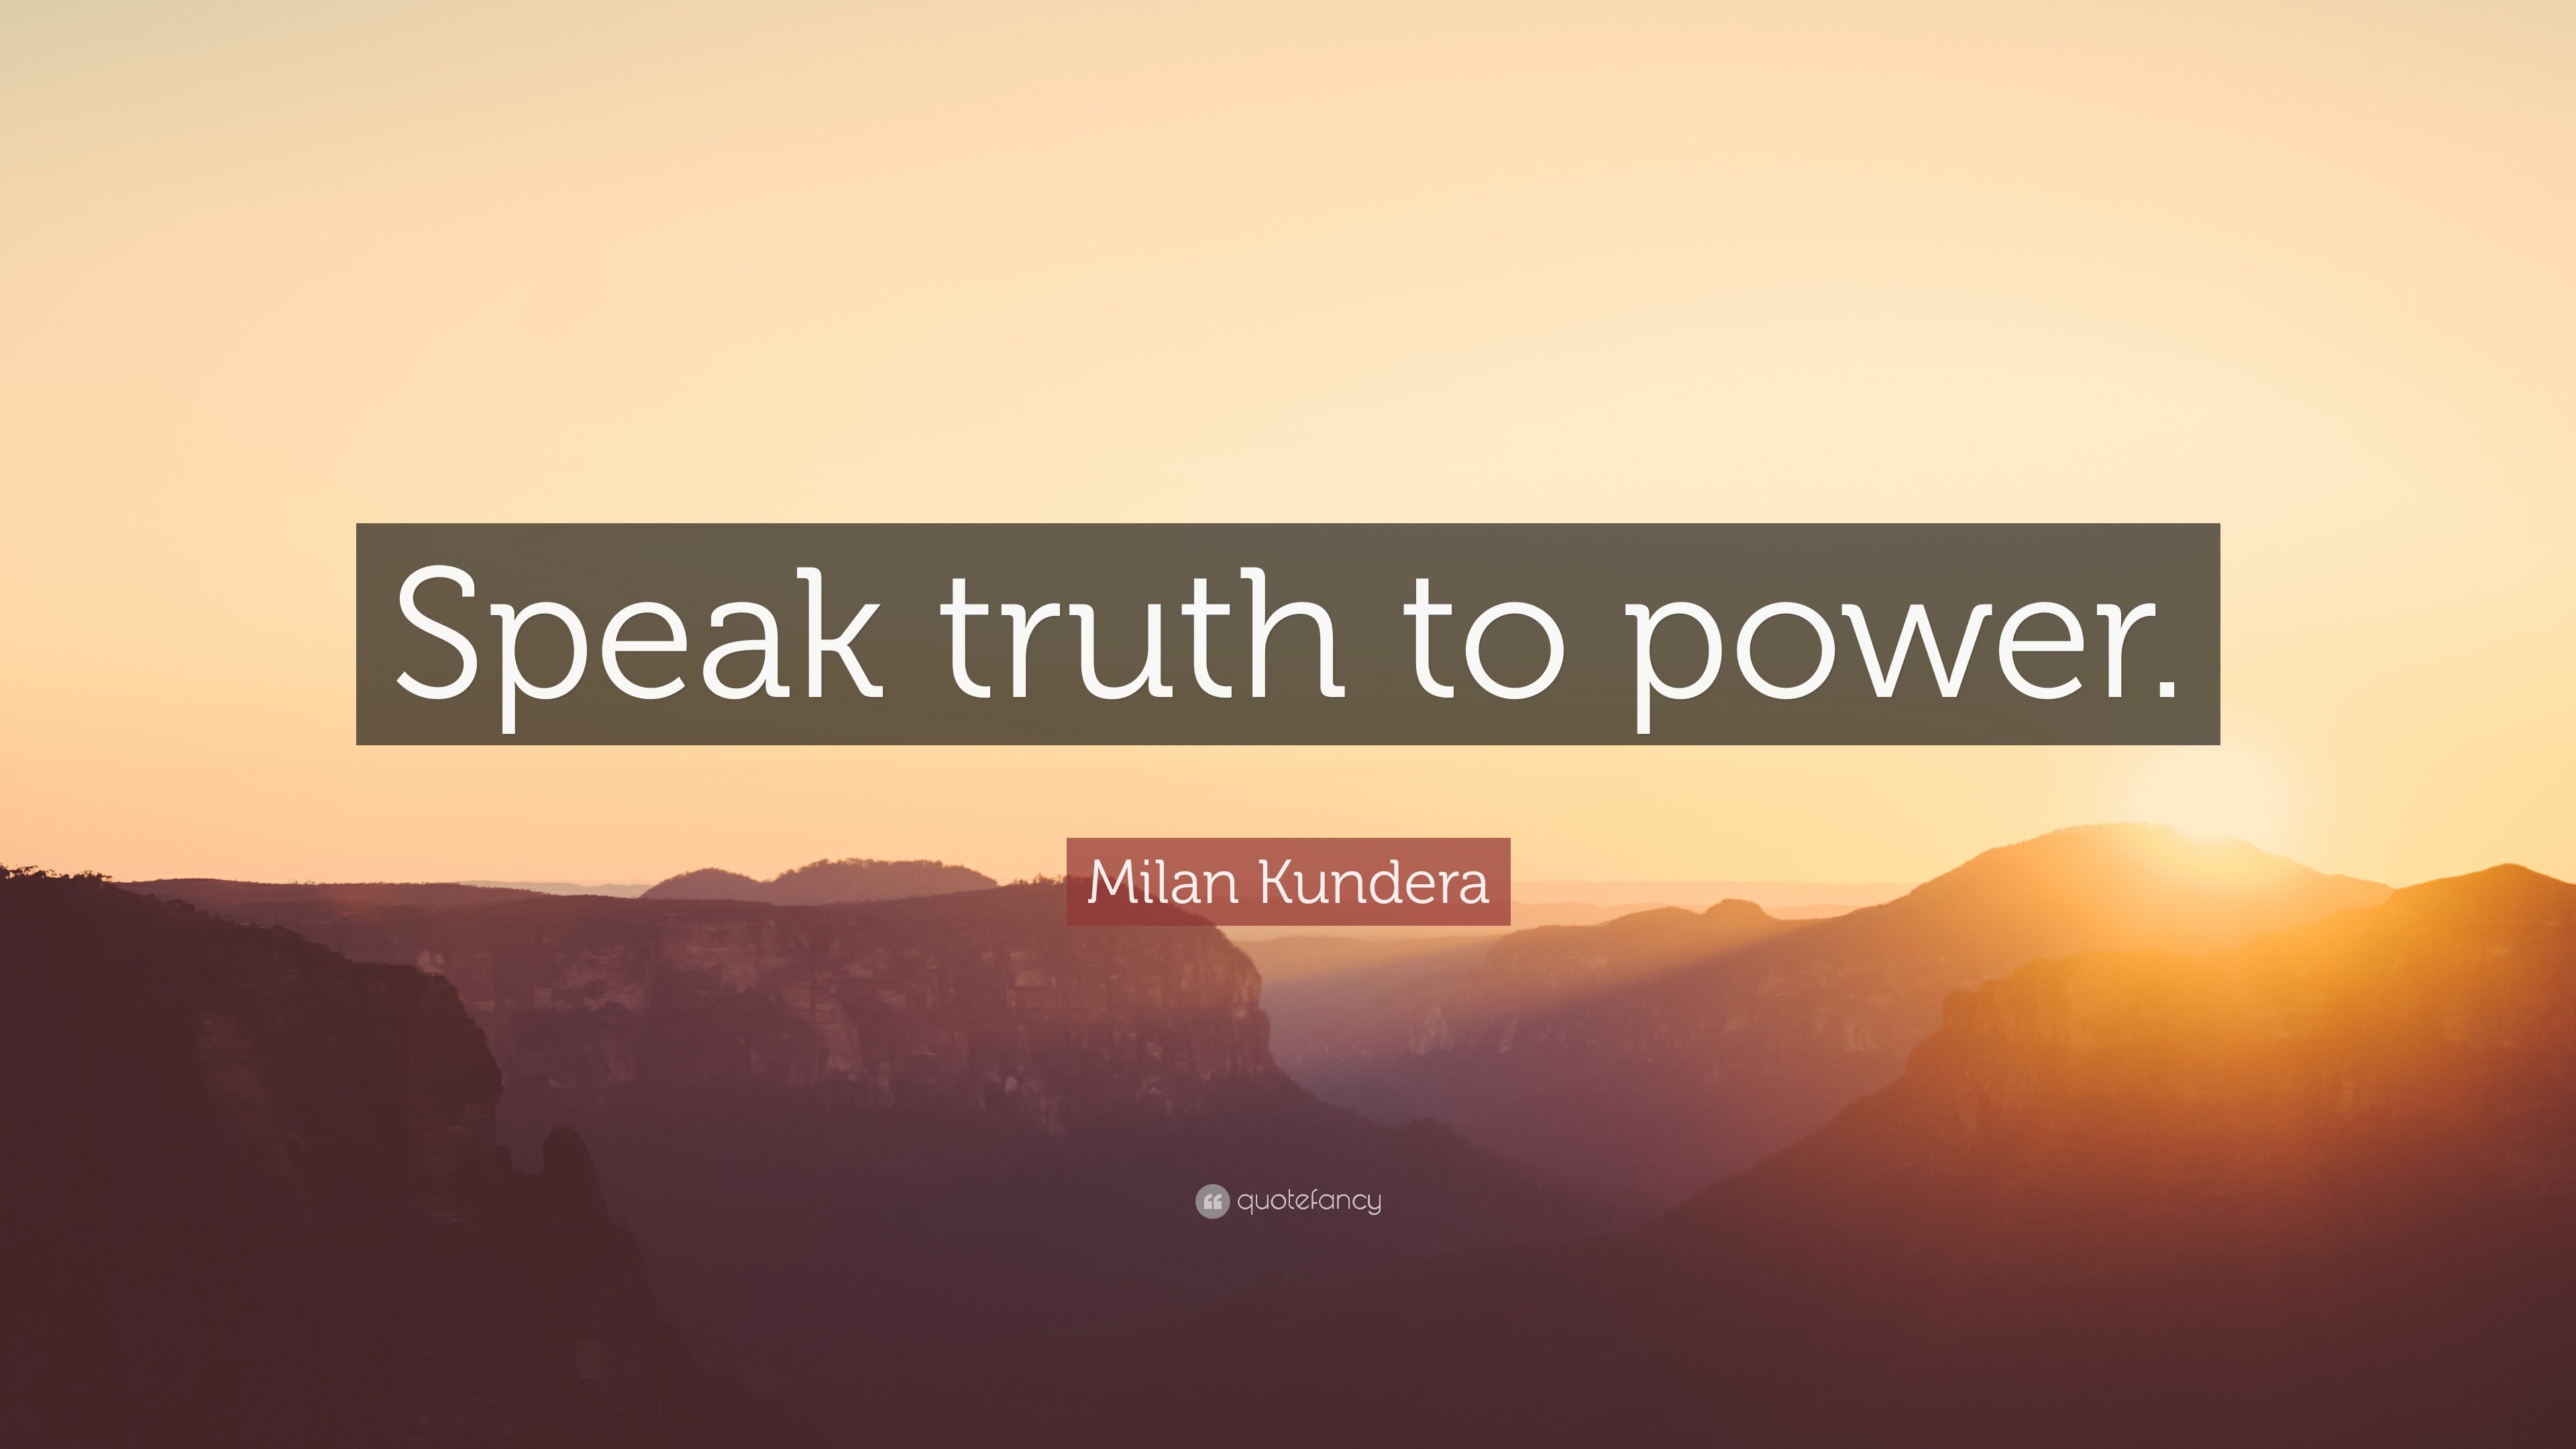 Milan Kundera Quote: "Speak truth to power." (9 wallpapers ...